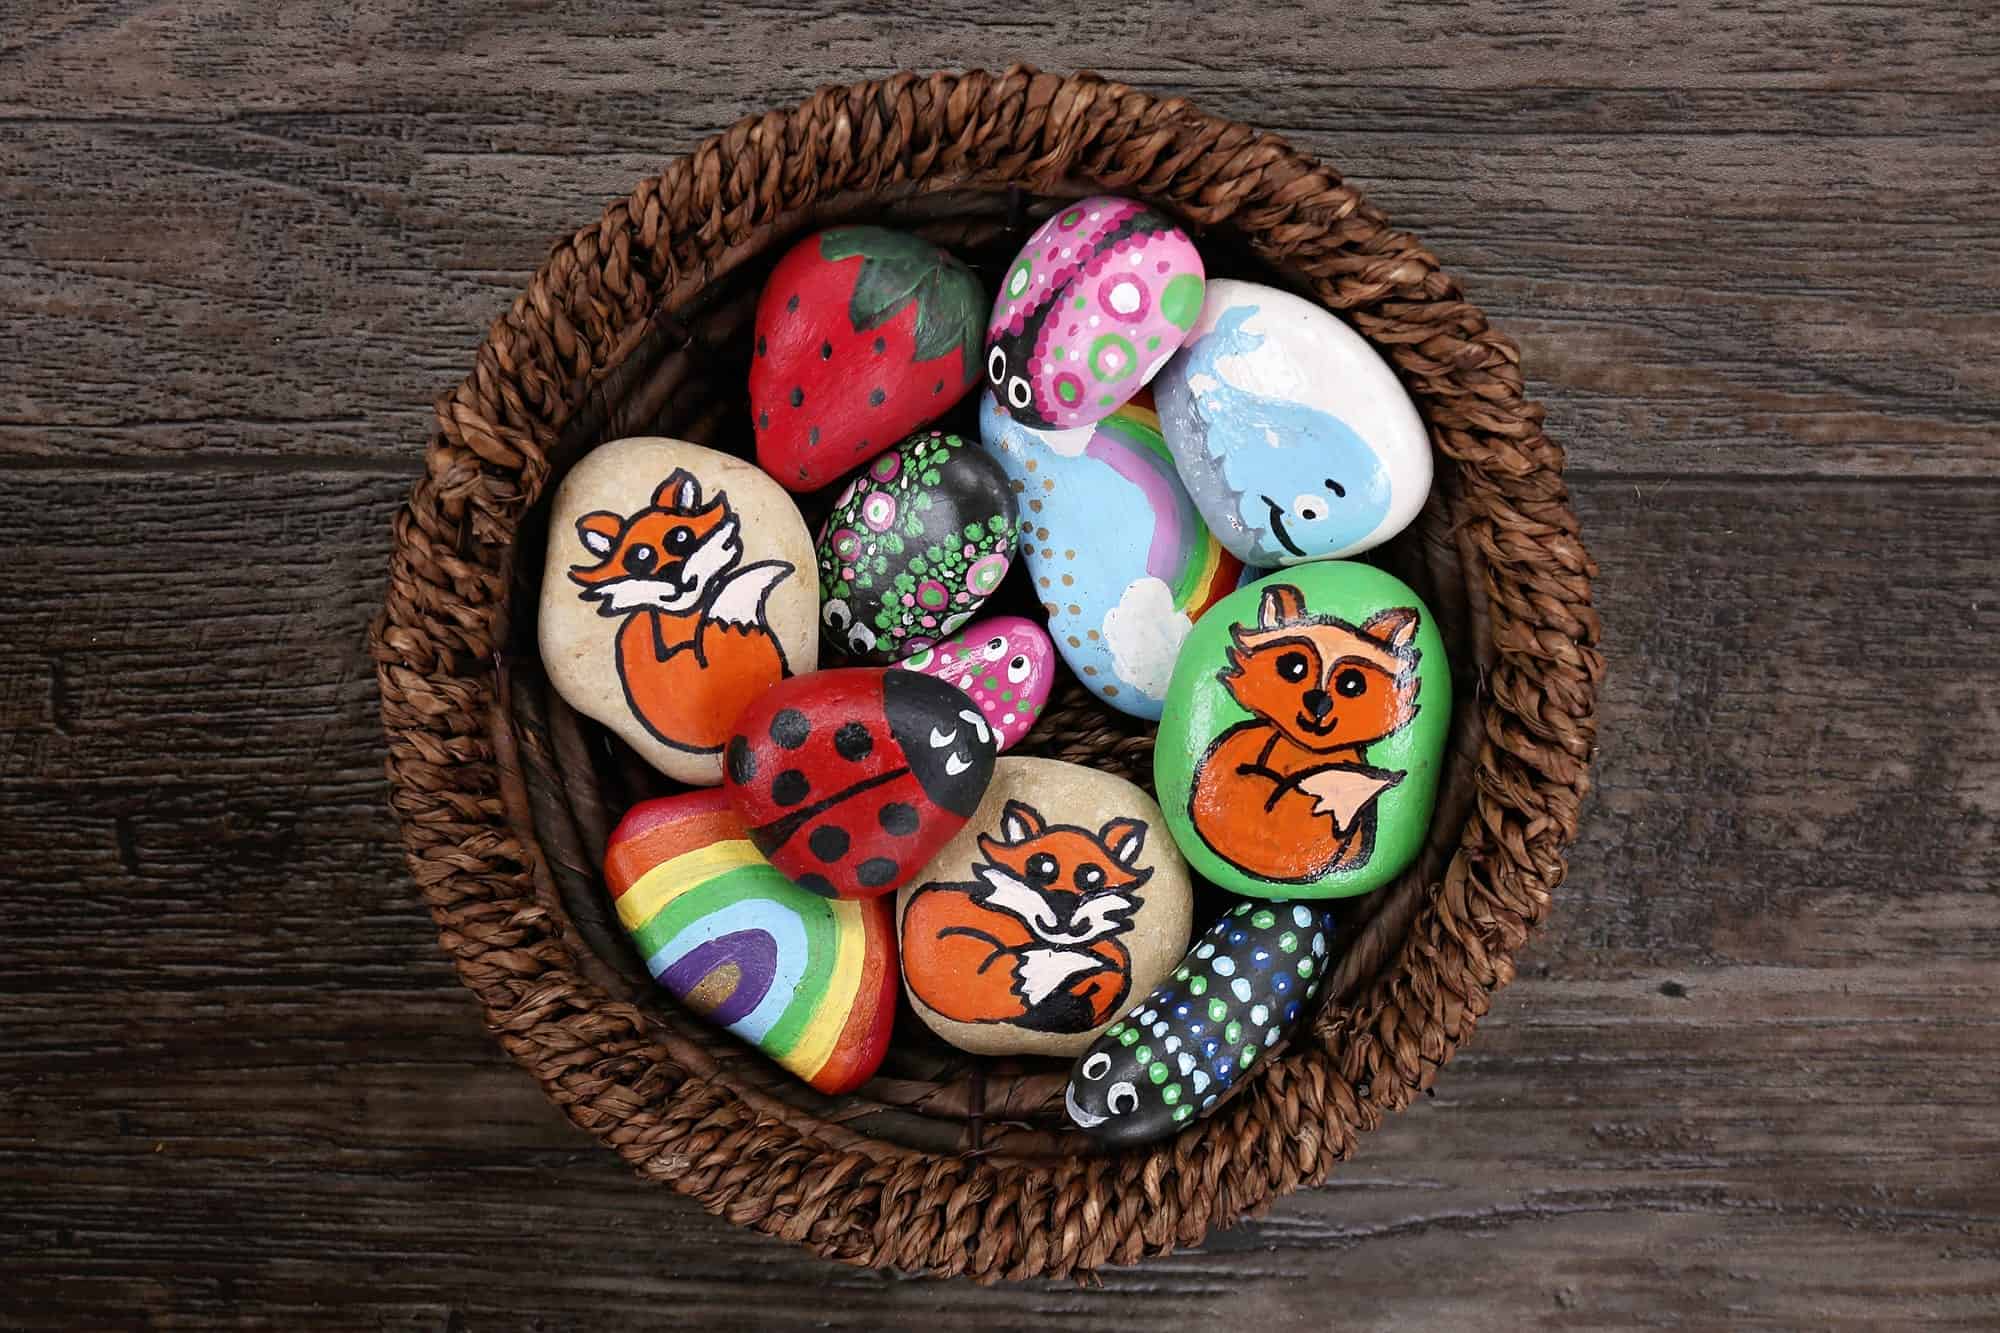 A basket of painted garden pebbles